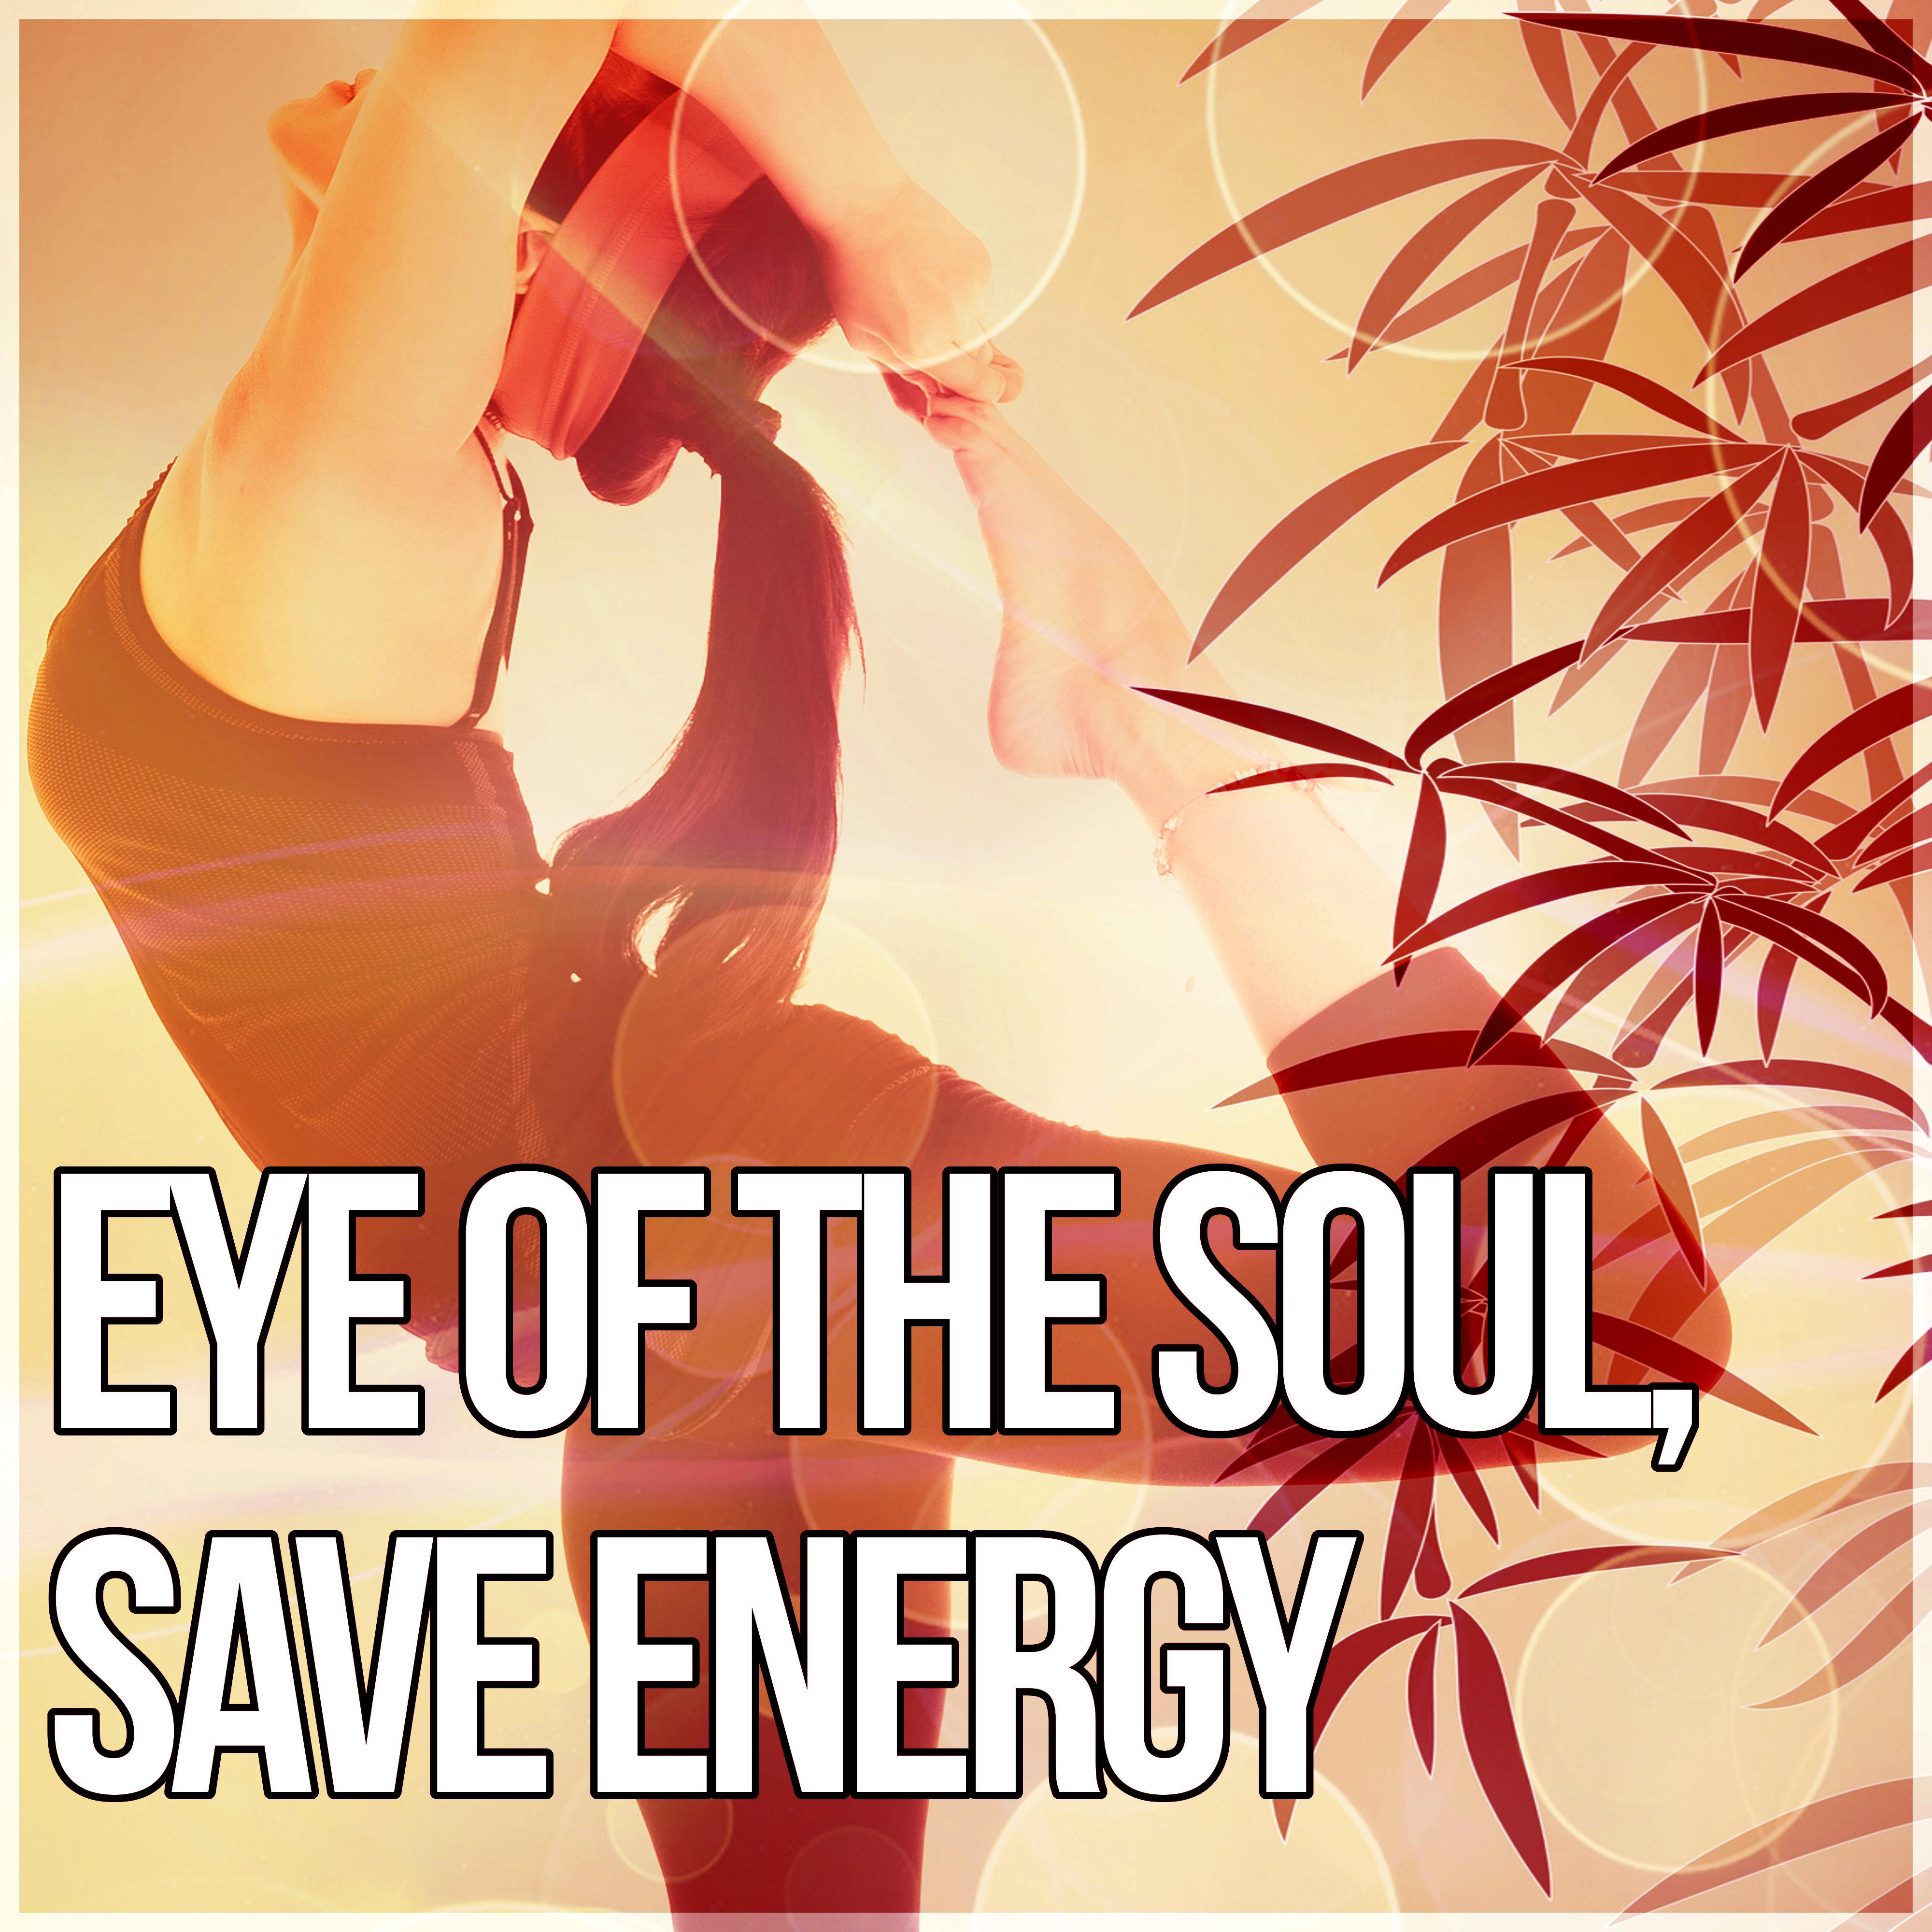 Eye of the Soul, Save Energy - Reiki Healing, Mantras, Harmony & Serenity, Calming Sounds for Peace of Mind, Yoga Music